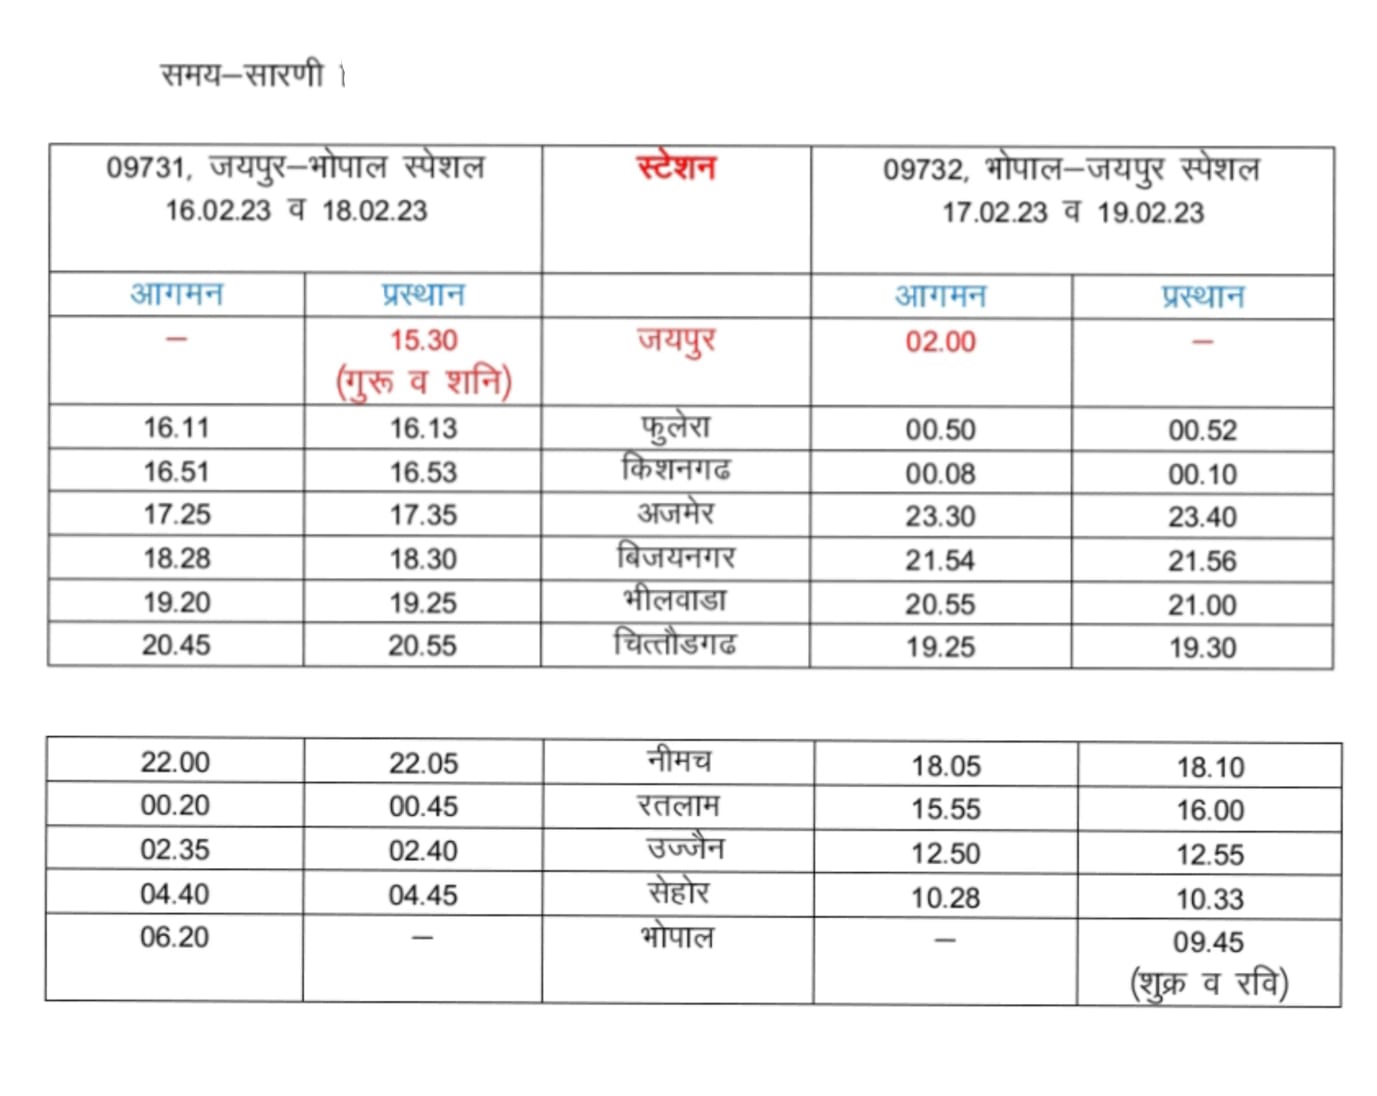 Operation of Jaipur-Bhopal-Jaipur special (02 trips) train service on 16